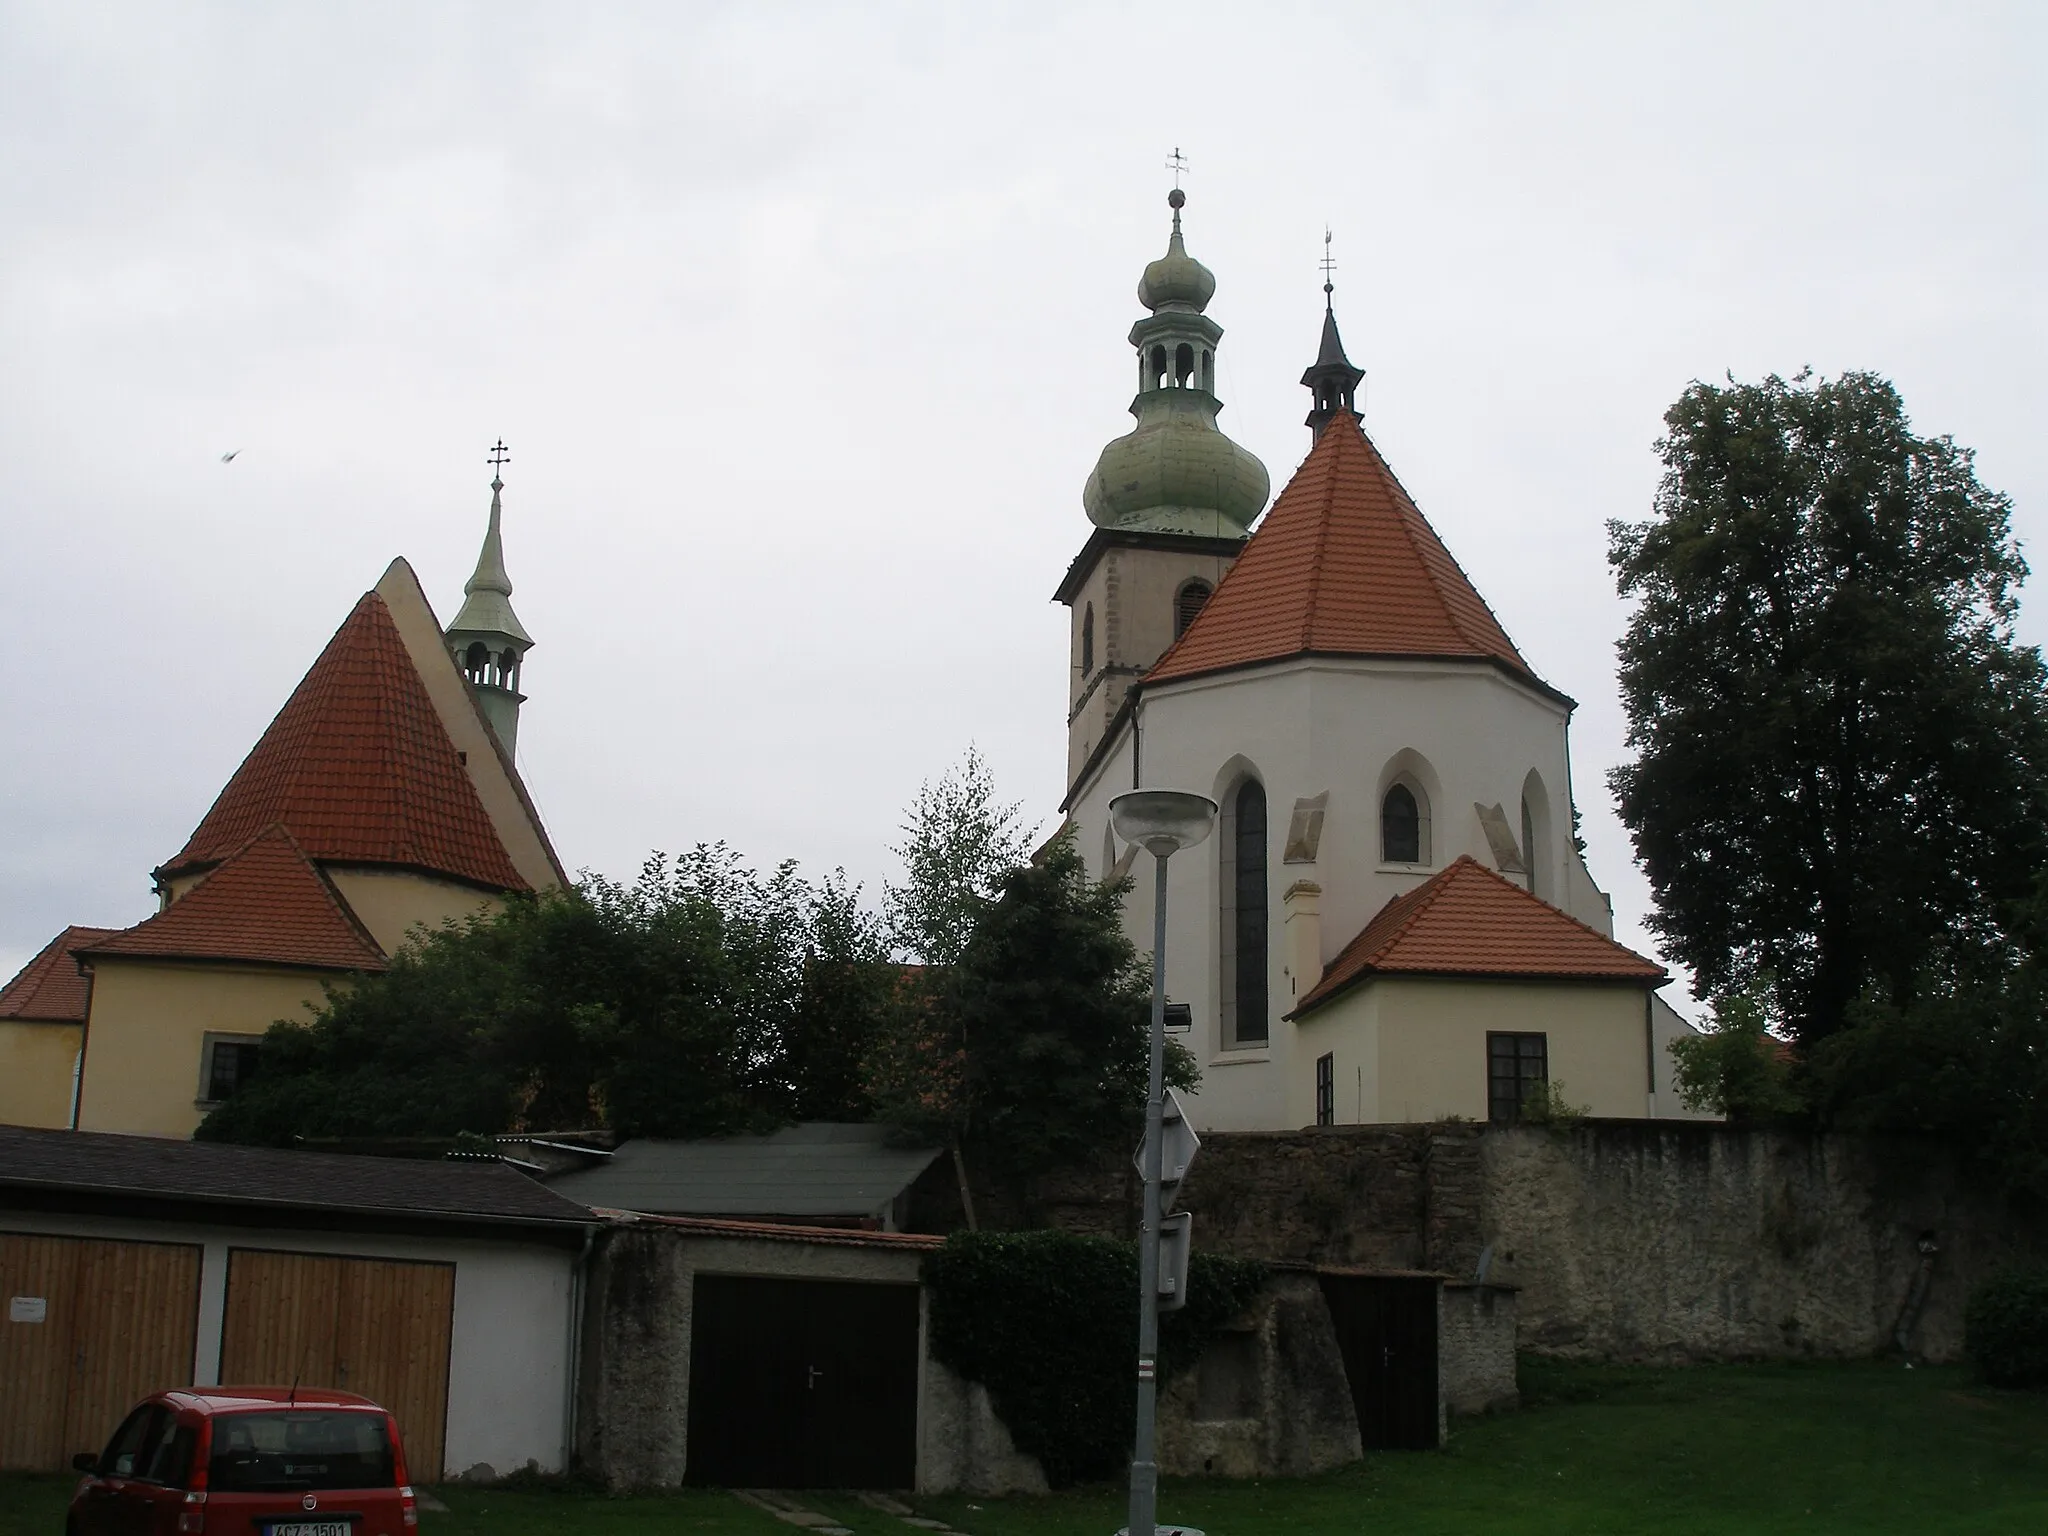 Photo showing: Churches of Saint Florian (left hand side) and Saint Peter and Paul (right hand side) in Kaplice